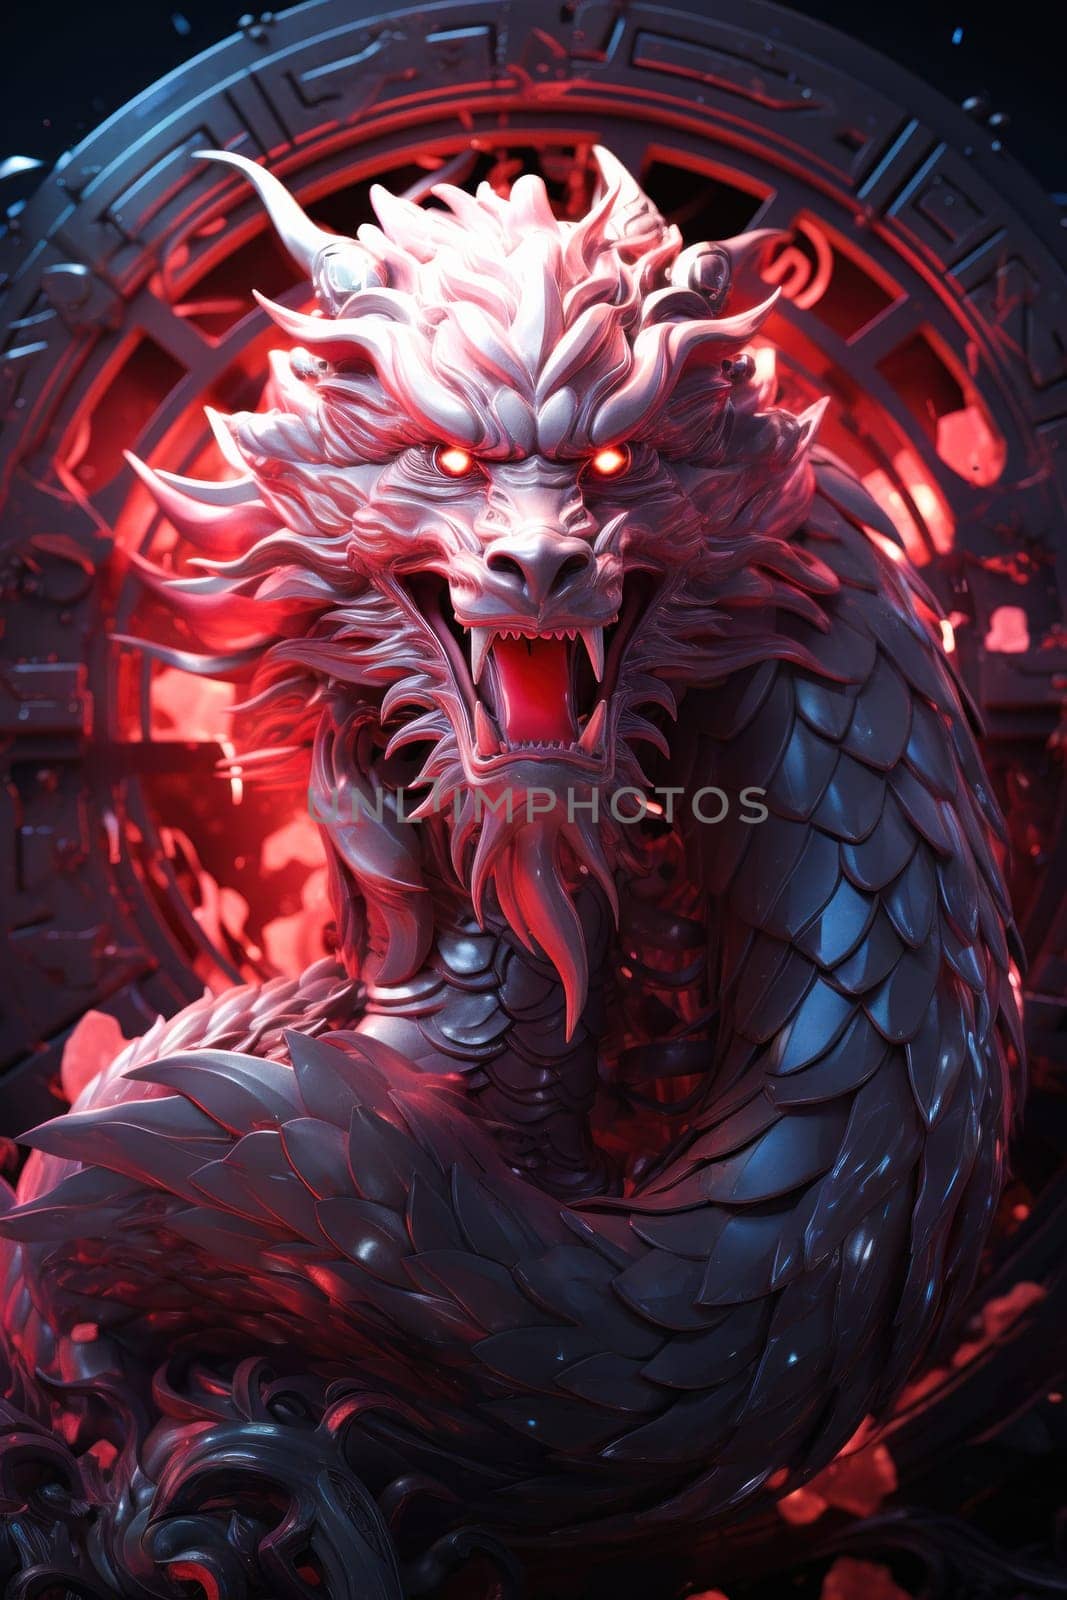 A photograph of a dragon portrait that attracts attention with bright red and blue tones, evoking a sense of delight and mystery